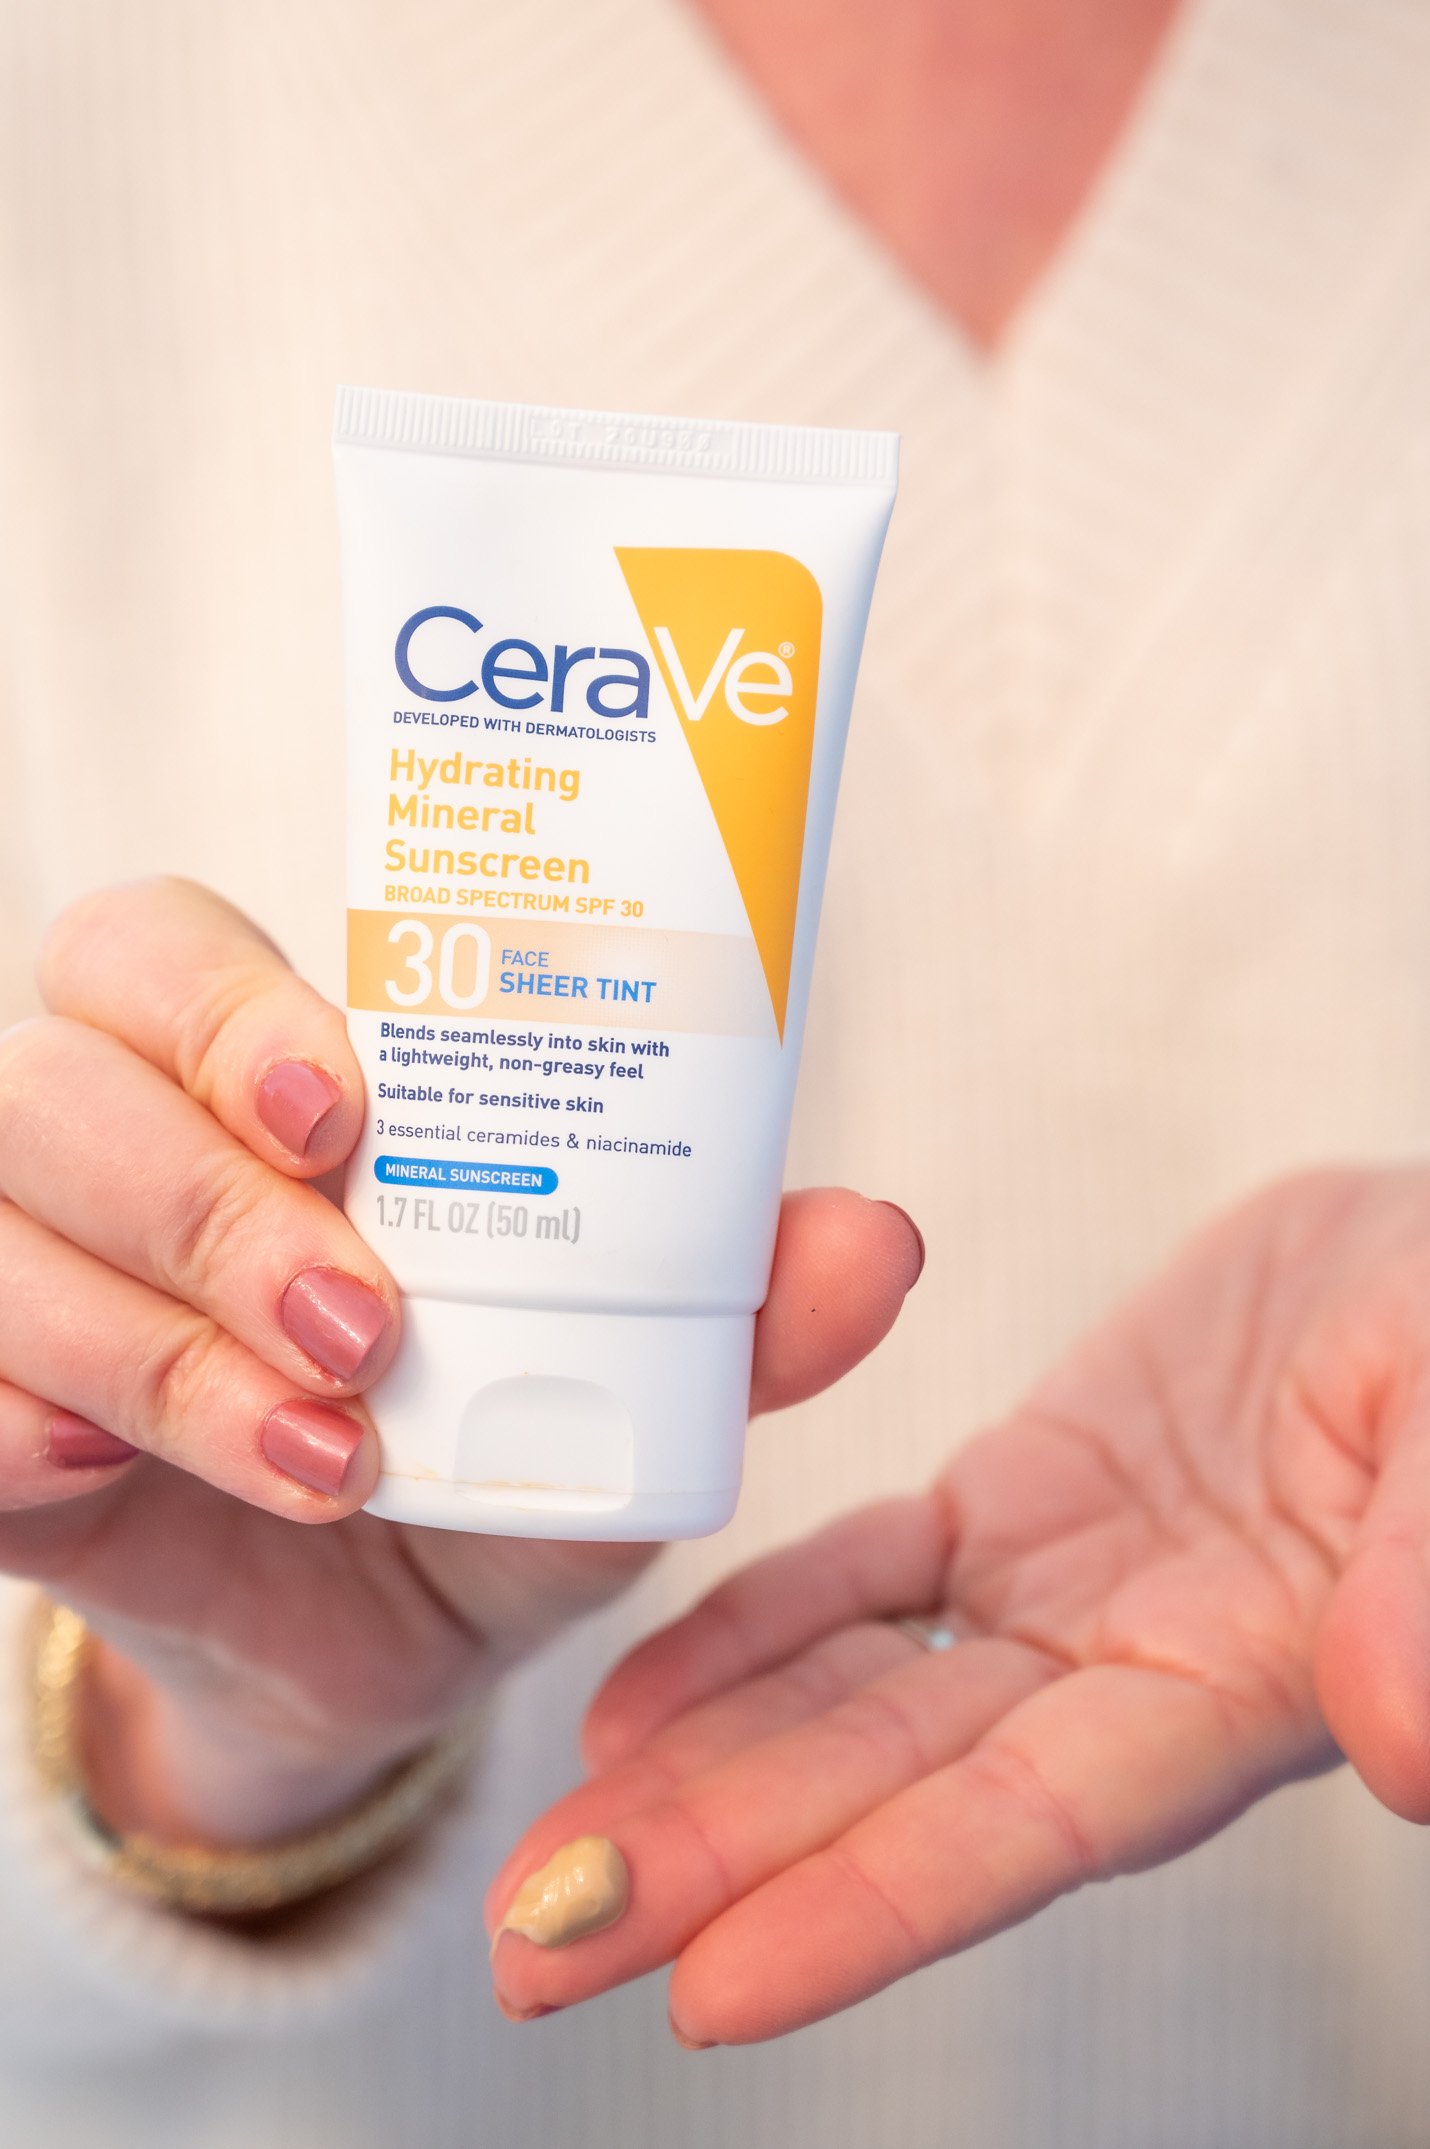 #2 - CeraVe Tinted Sunscreen with SPF 30